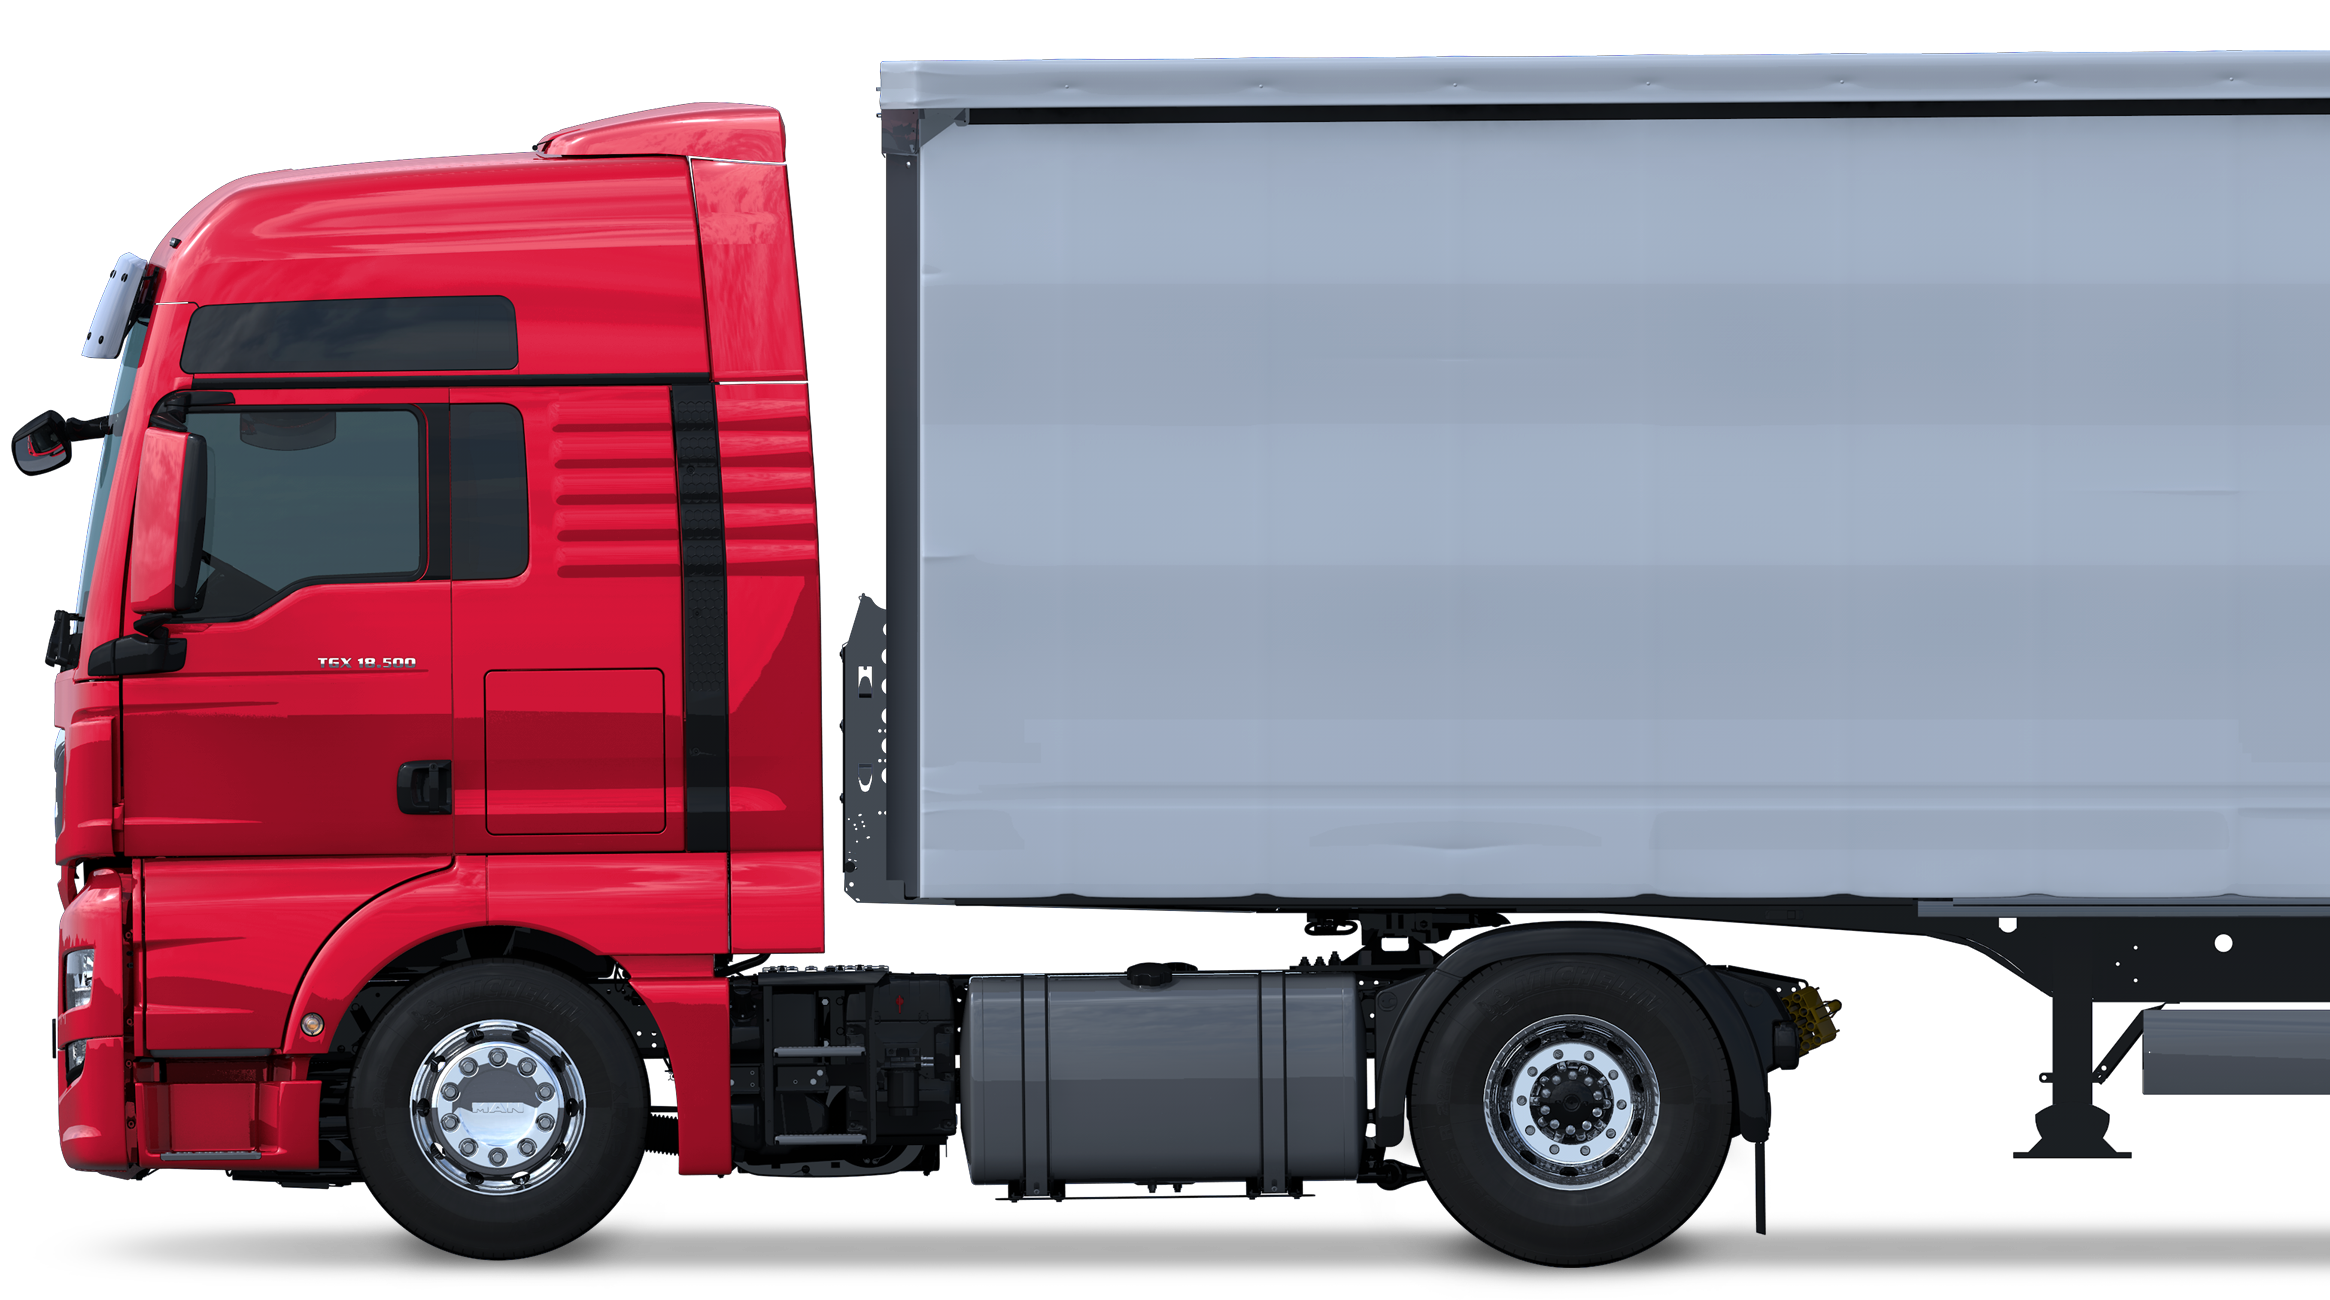 Cargo Truck PNG HQ Image - Cargo Truck Png